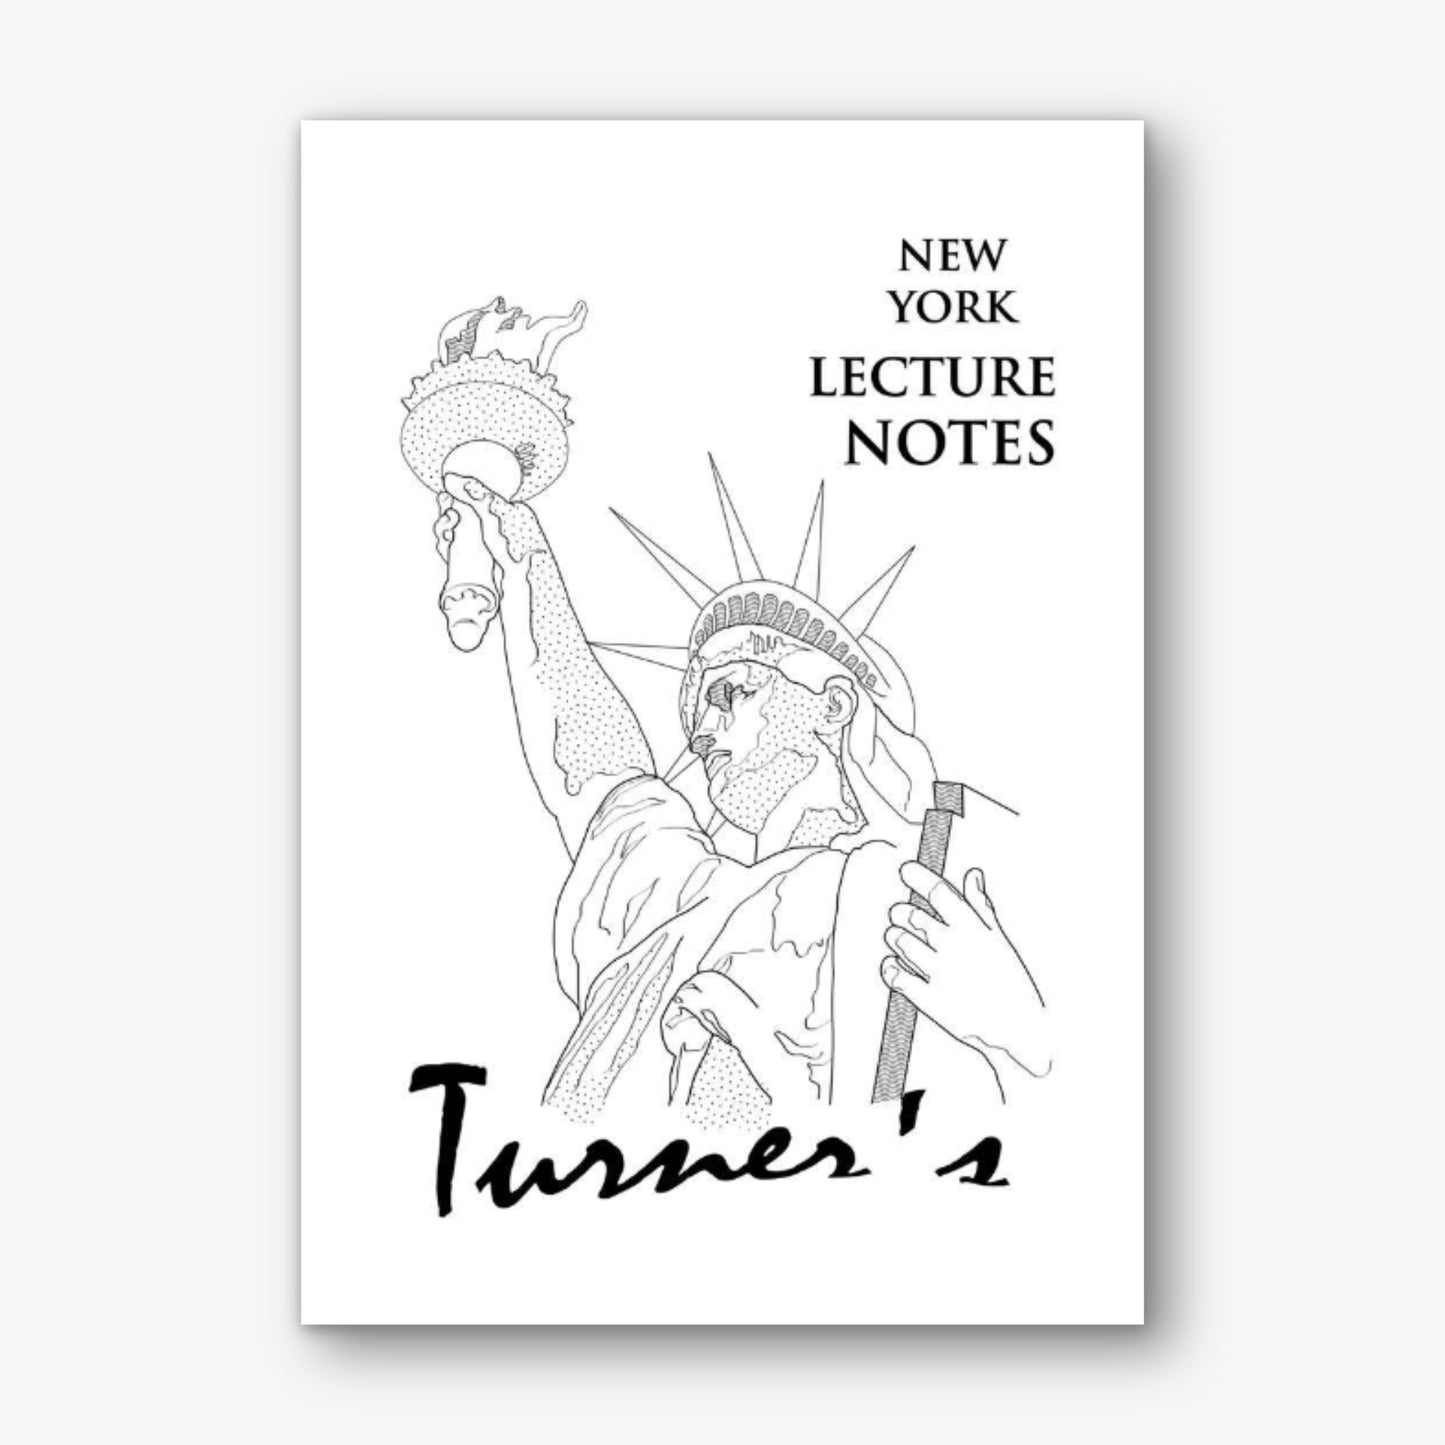 New York Lecture Notes by Peter Turner